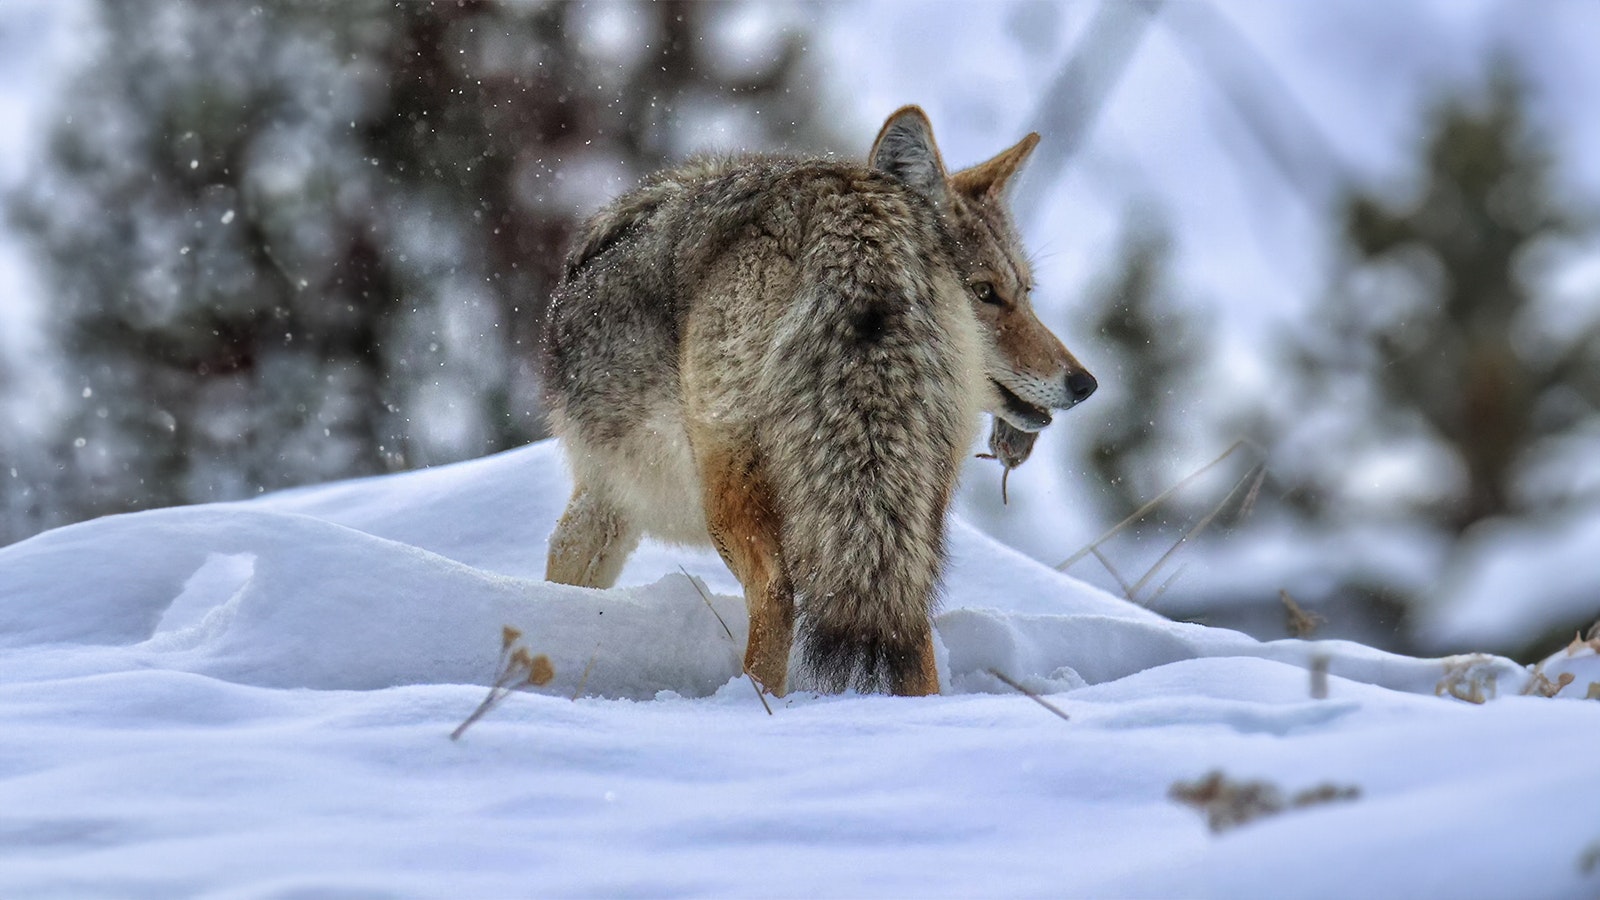 To eat during the winter, coyotes in Yellowstone National Park frequently catch voles burrowing in the snow.